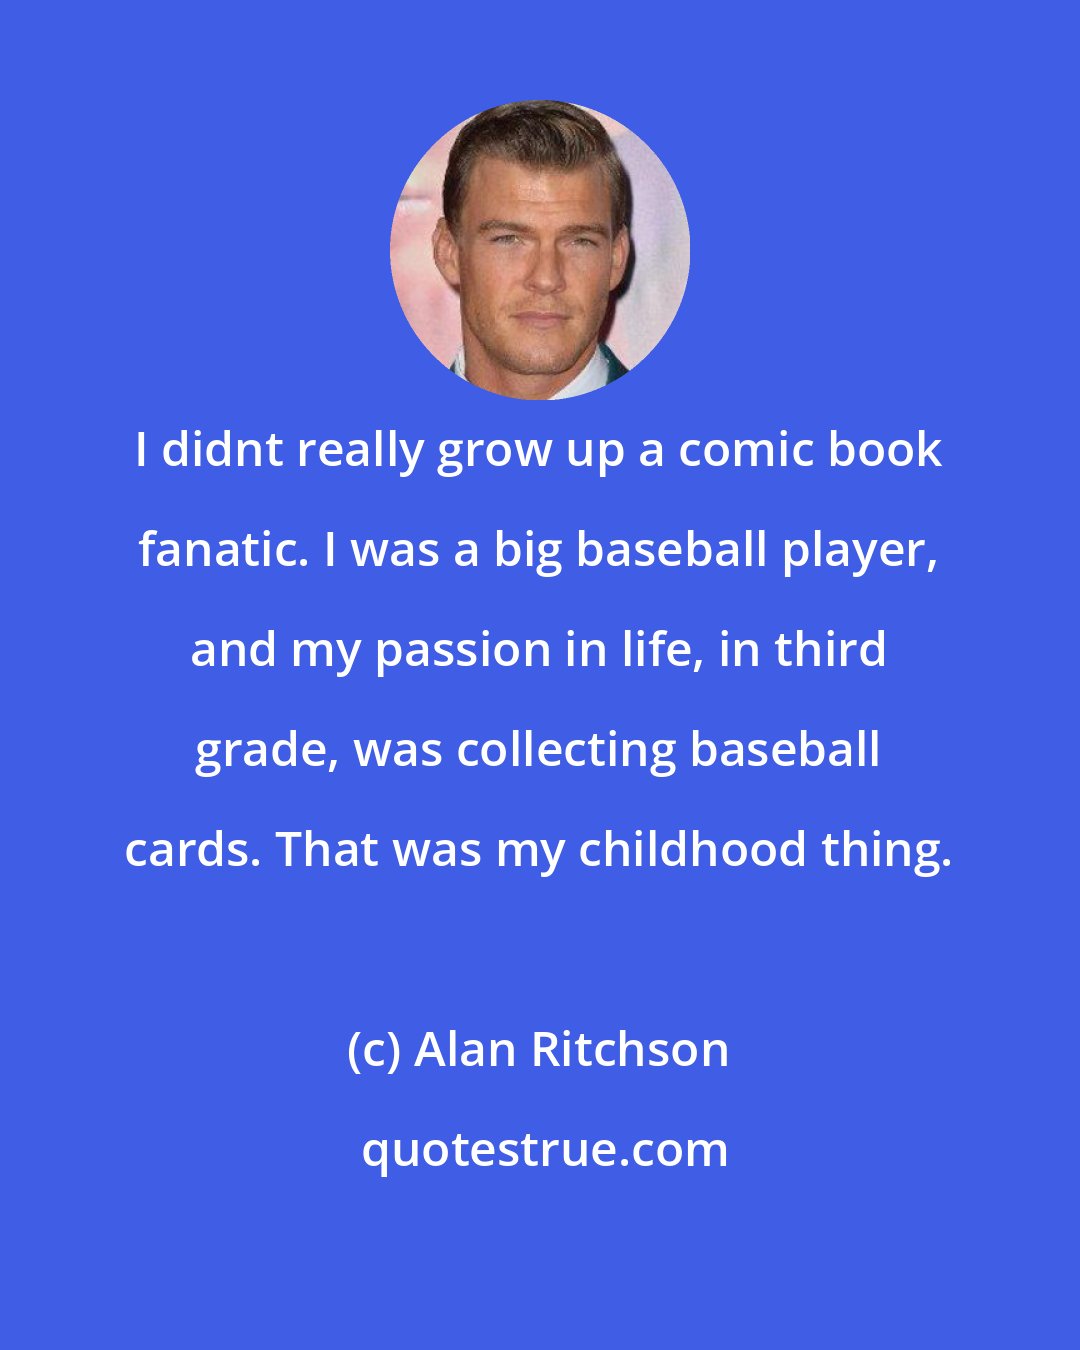 Alan Ritchson: I didnt really grow up a comic book fanatic. I was a big baseball player, and my passion in life, in third grade, was collecting baseball cards. That was my childhood thing.